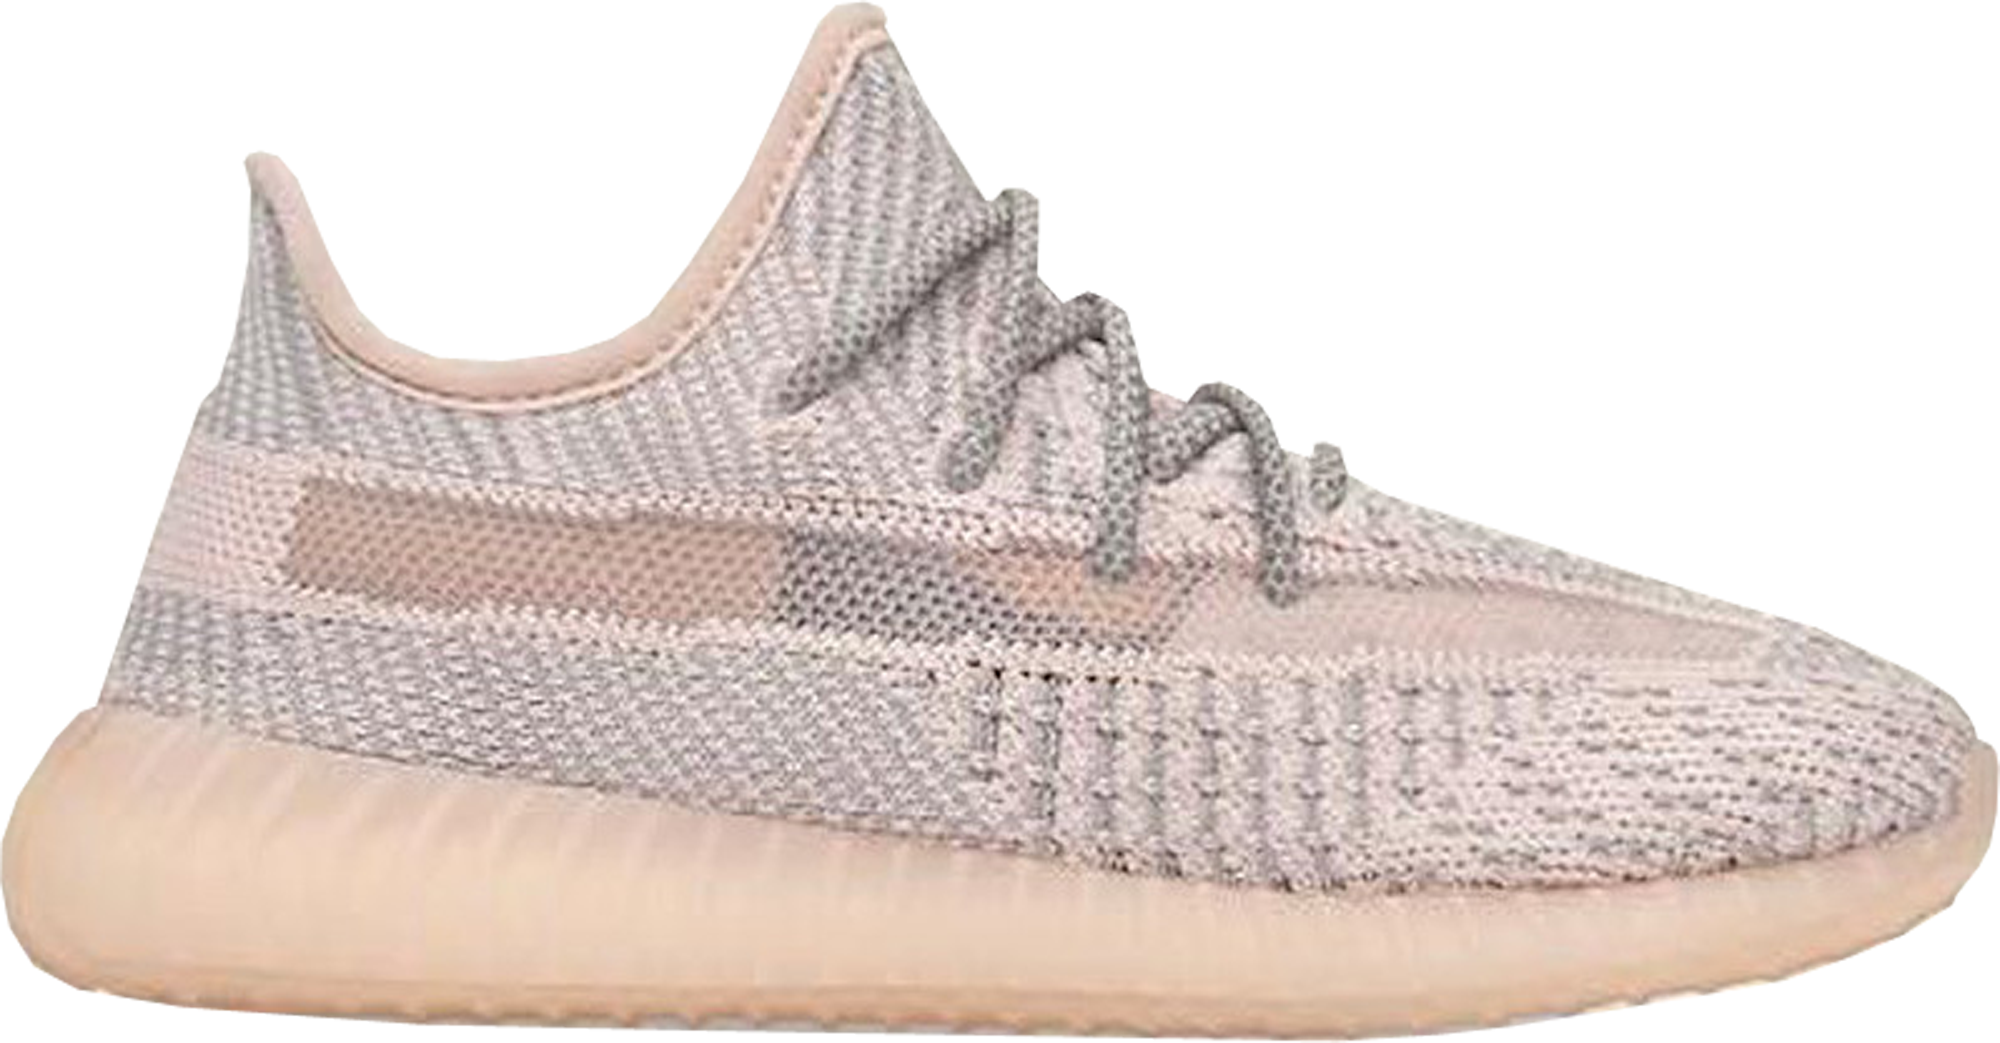 yeezy 350 boost v2 synth